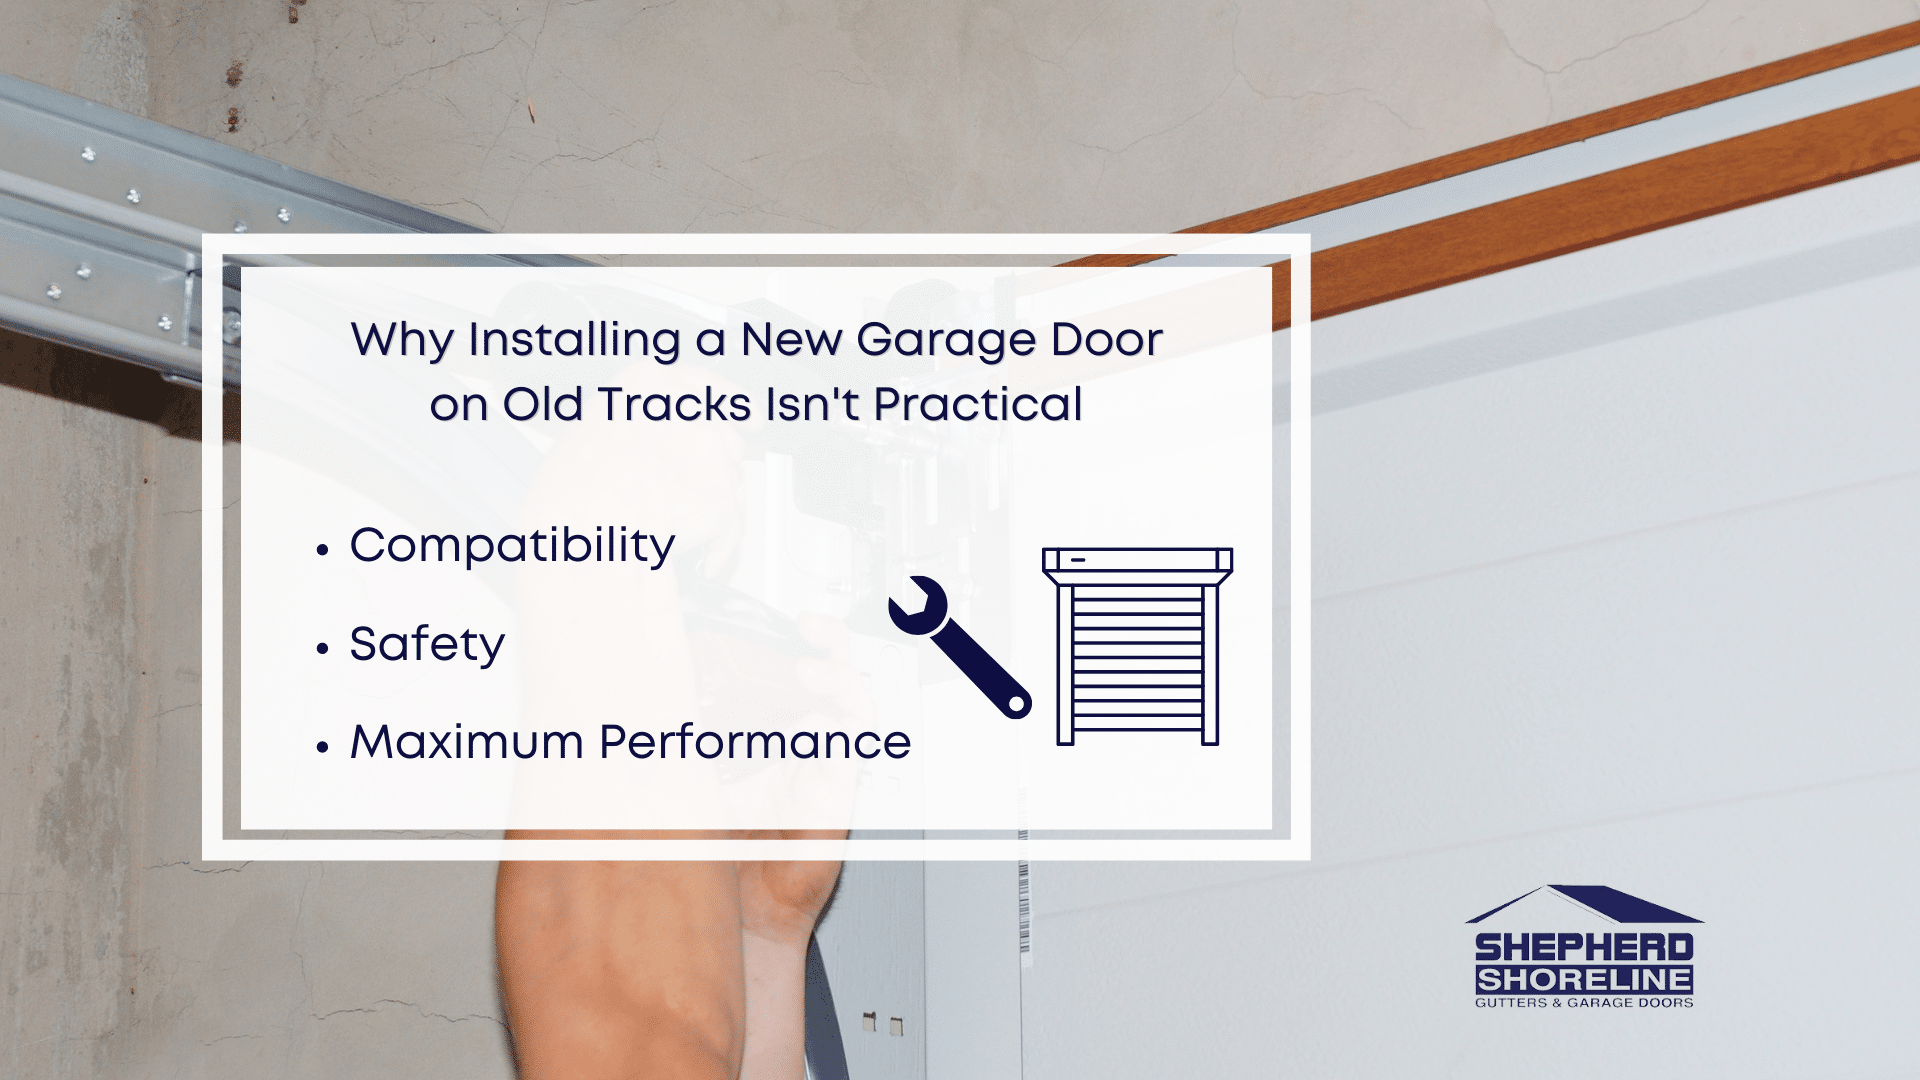 Infographic image of why installing a new garage door on old track isn't practical